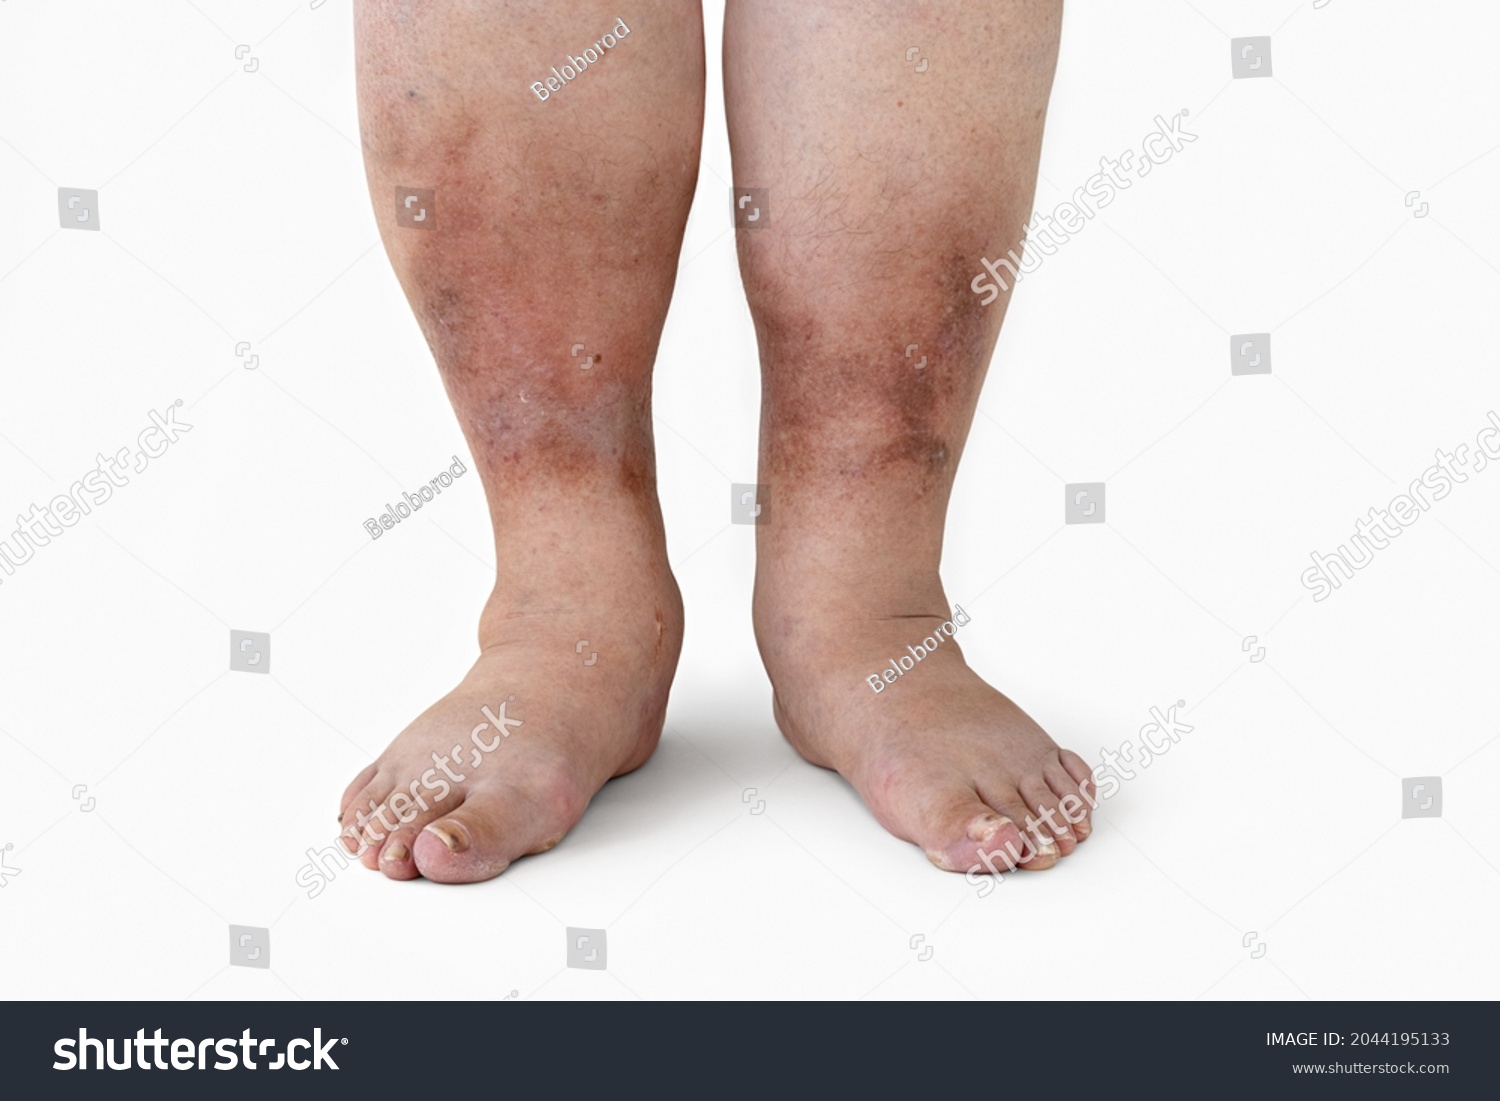 Swelling of the leg with inflammation in diabetic nephropathy in a woman, close-up. #2044195133